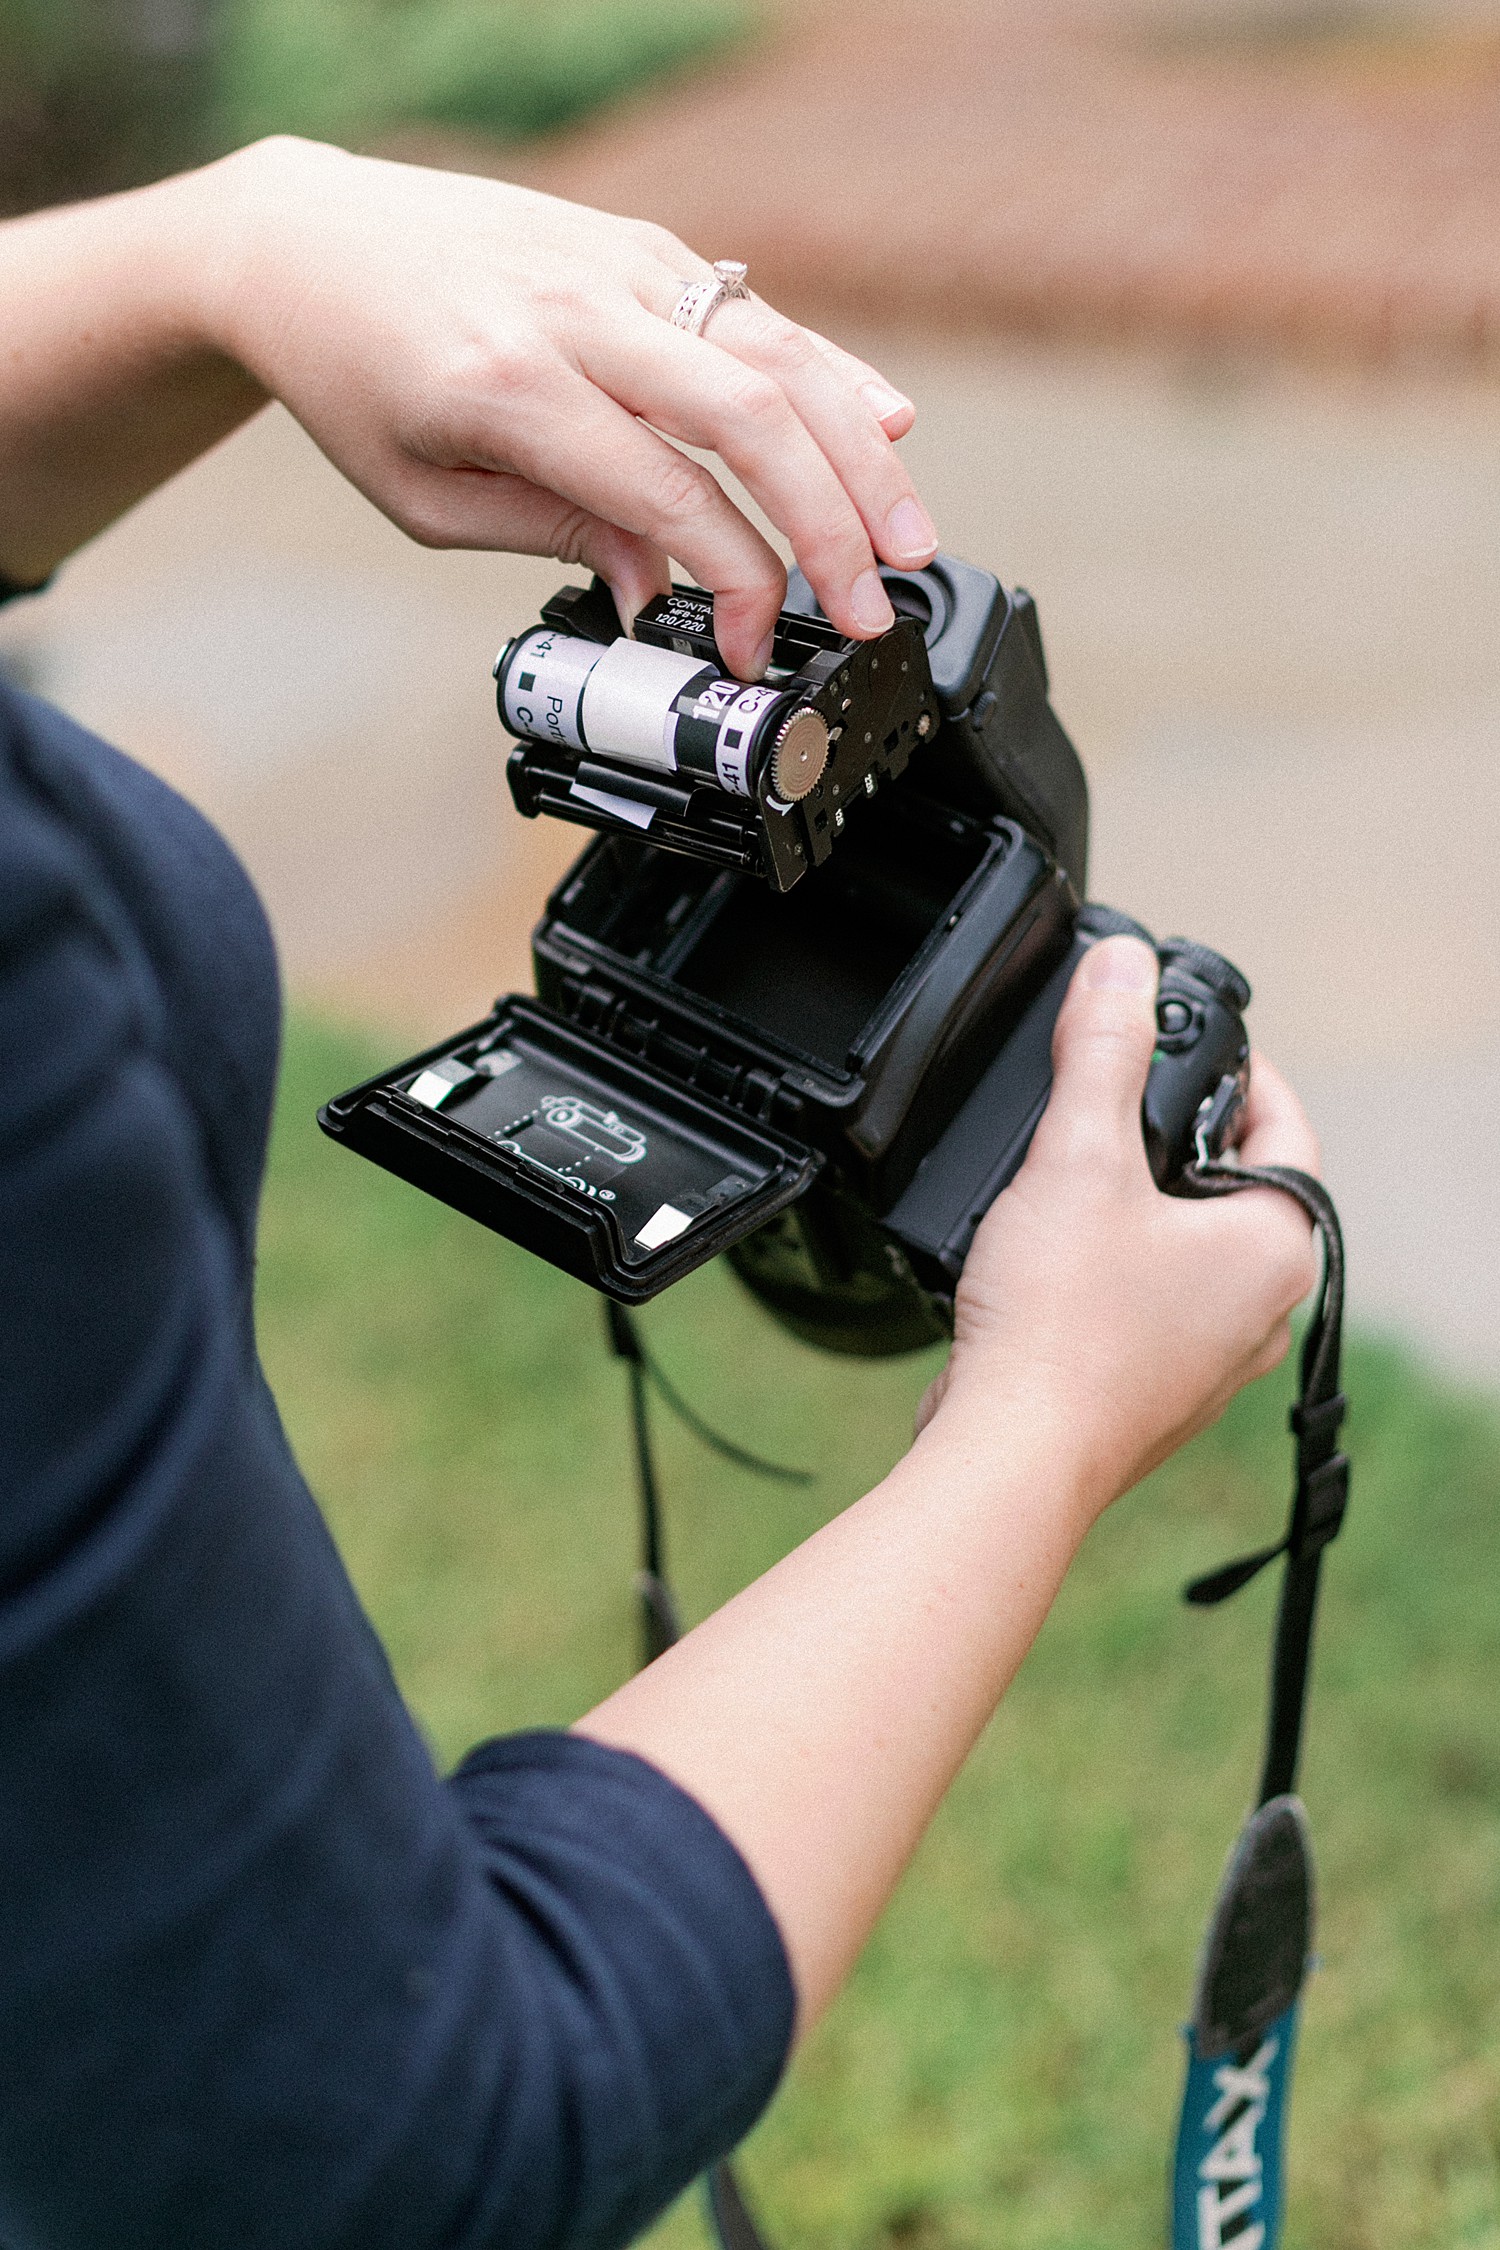 A female photographer inserts film into her analogue camera as she prepares to talk about What is Film Photography? Image by Victoria Heer, a Washington DC wedding photographer.